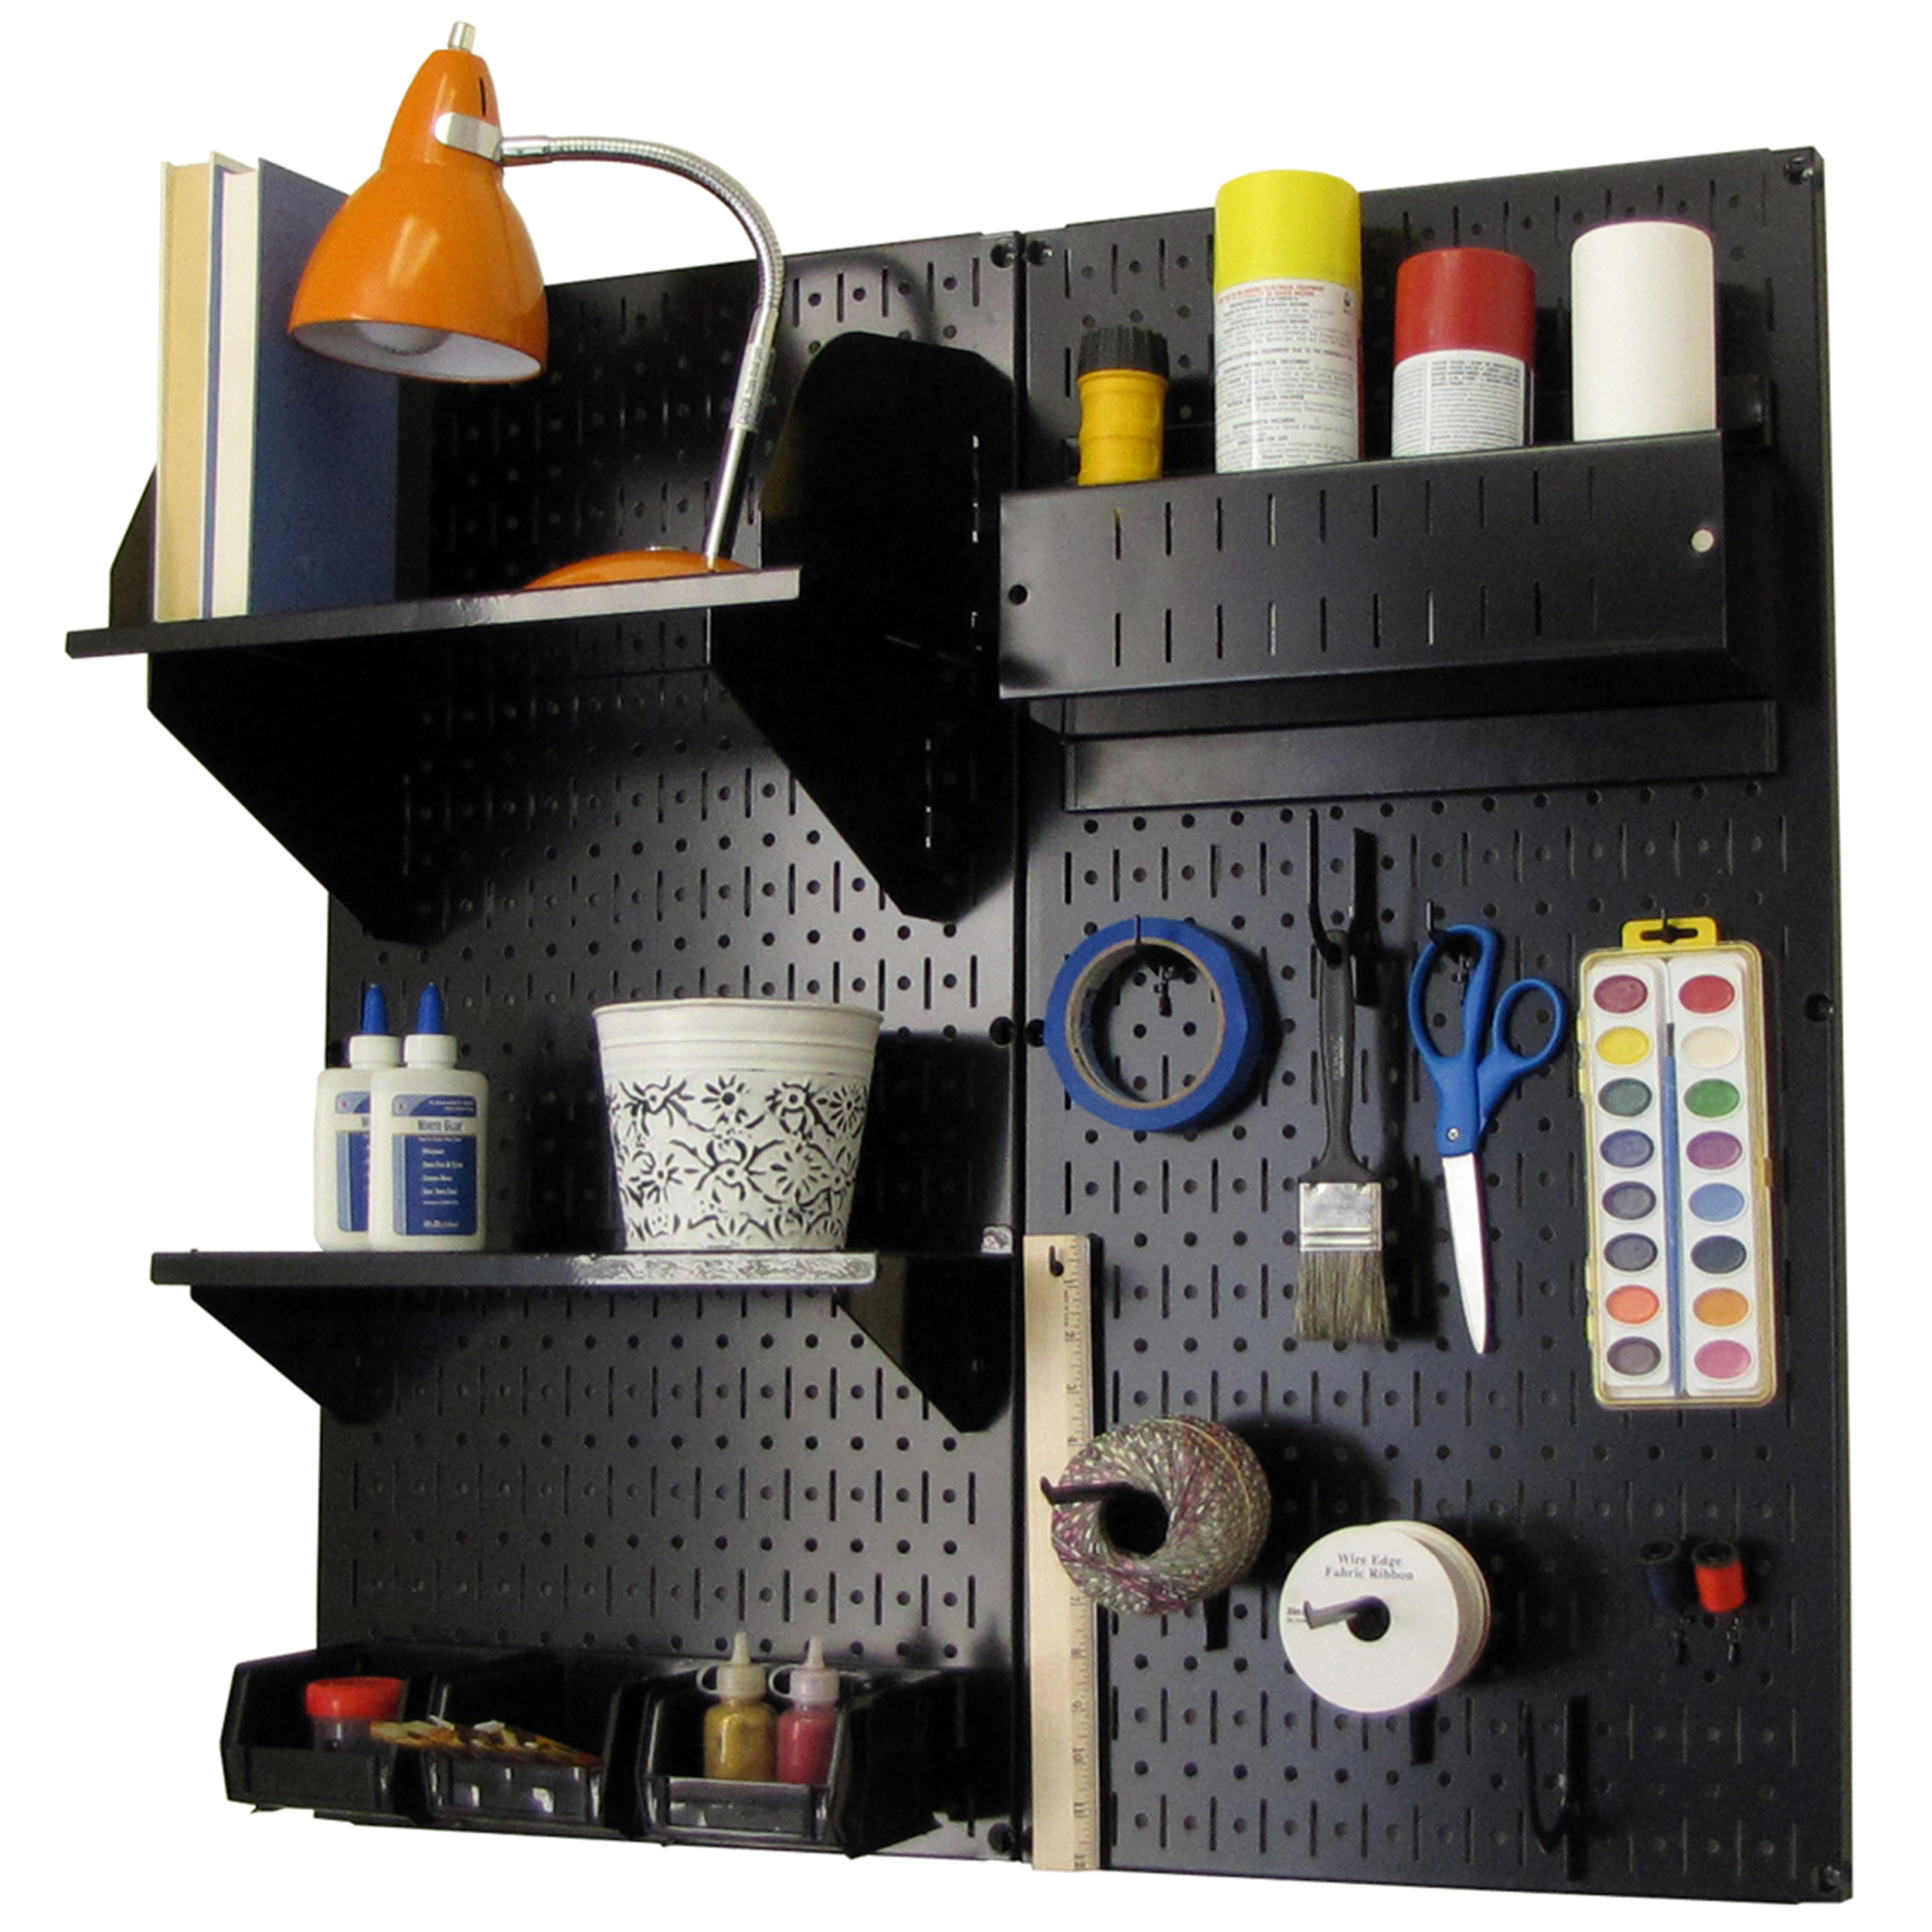 Pegboard Hobby Craft Pegboard Organizer Storage Kit With Black Pegboard And Black Accessories